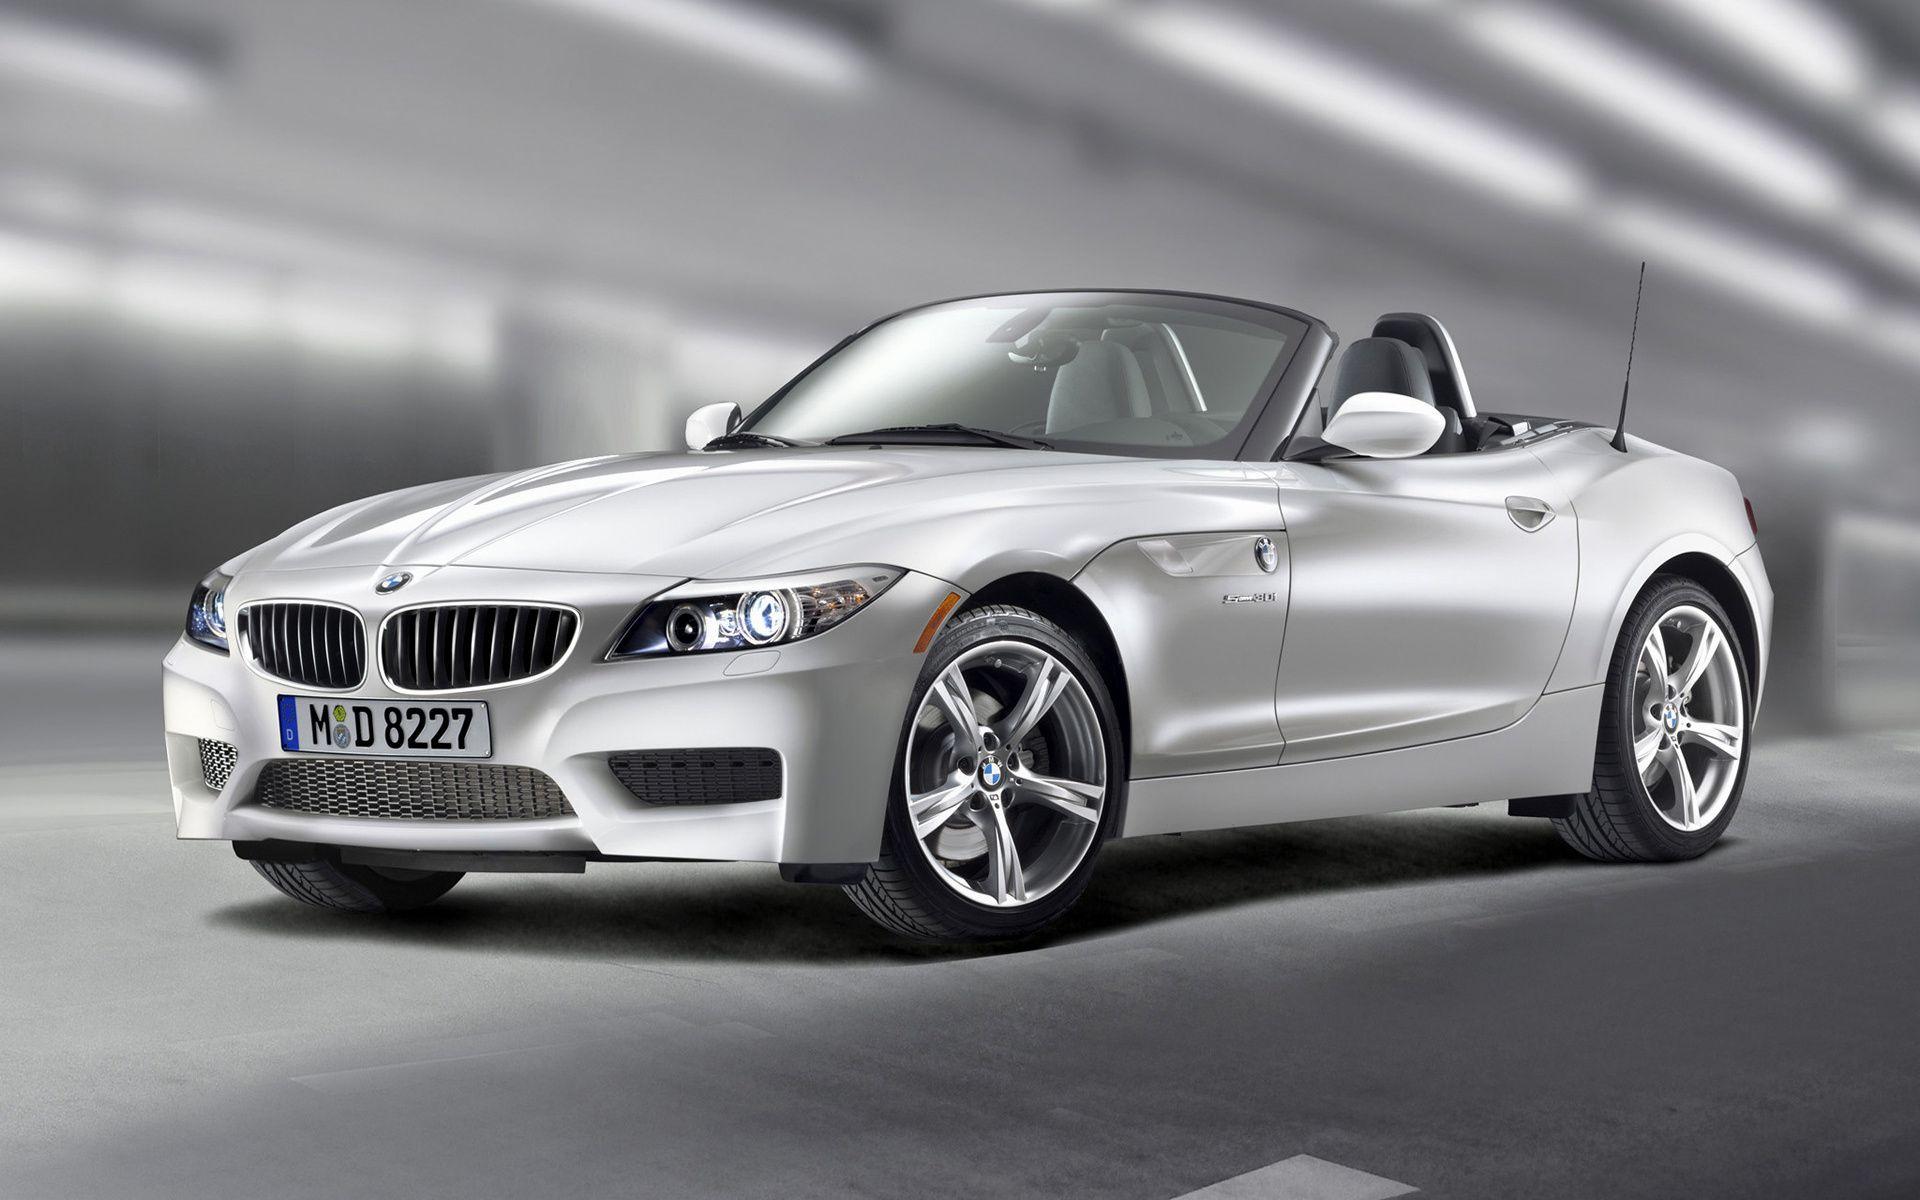 BMW Z4 30i Roadster M Sport (2009) US Wallpaper and HD Image